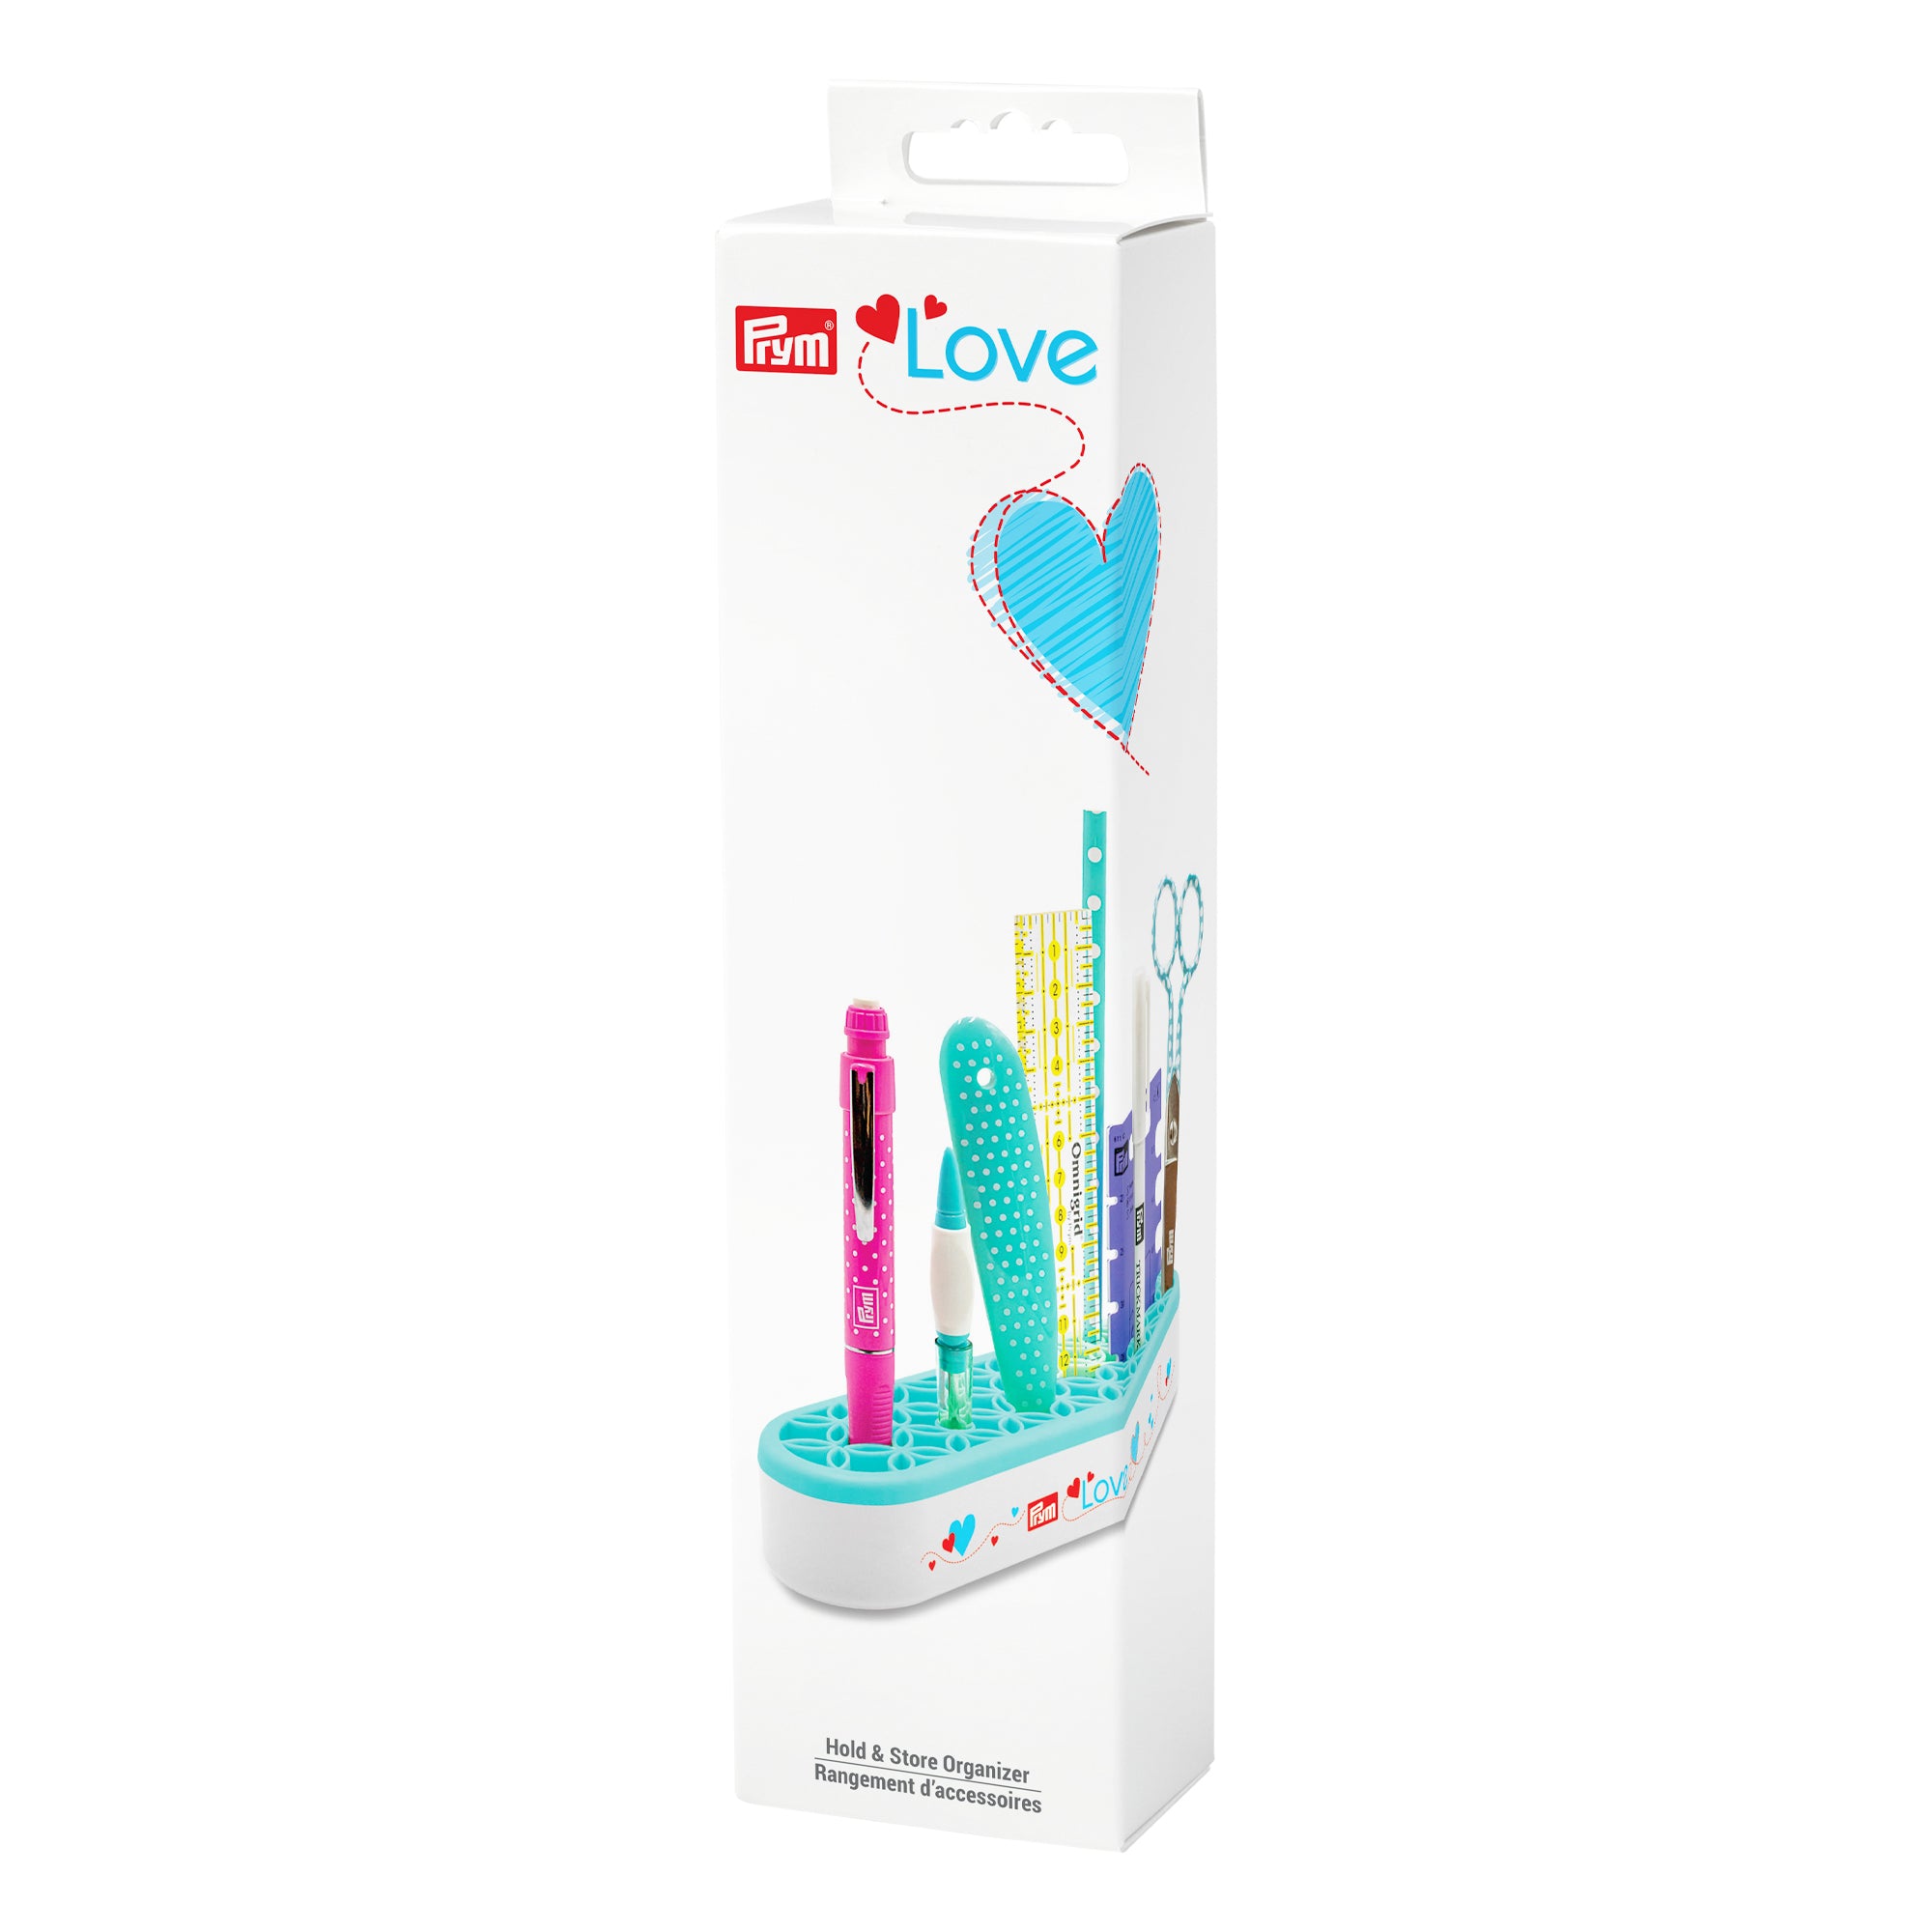 Prym Love Fabric Clips - Small & Large 15 Pc.